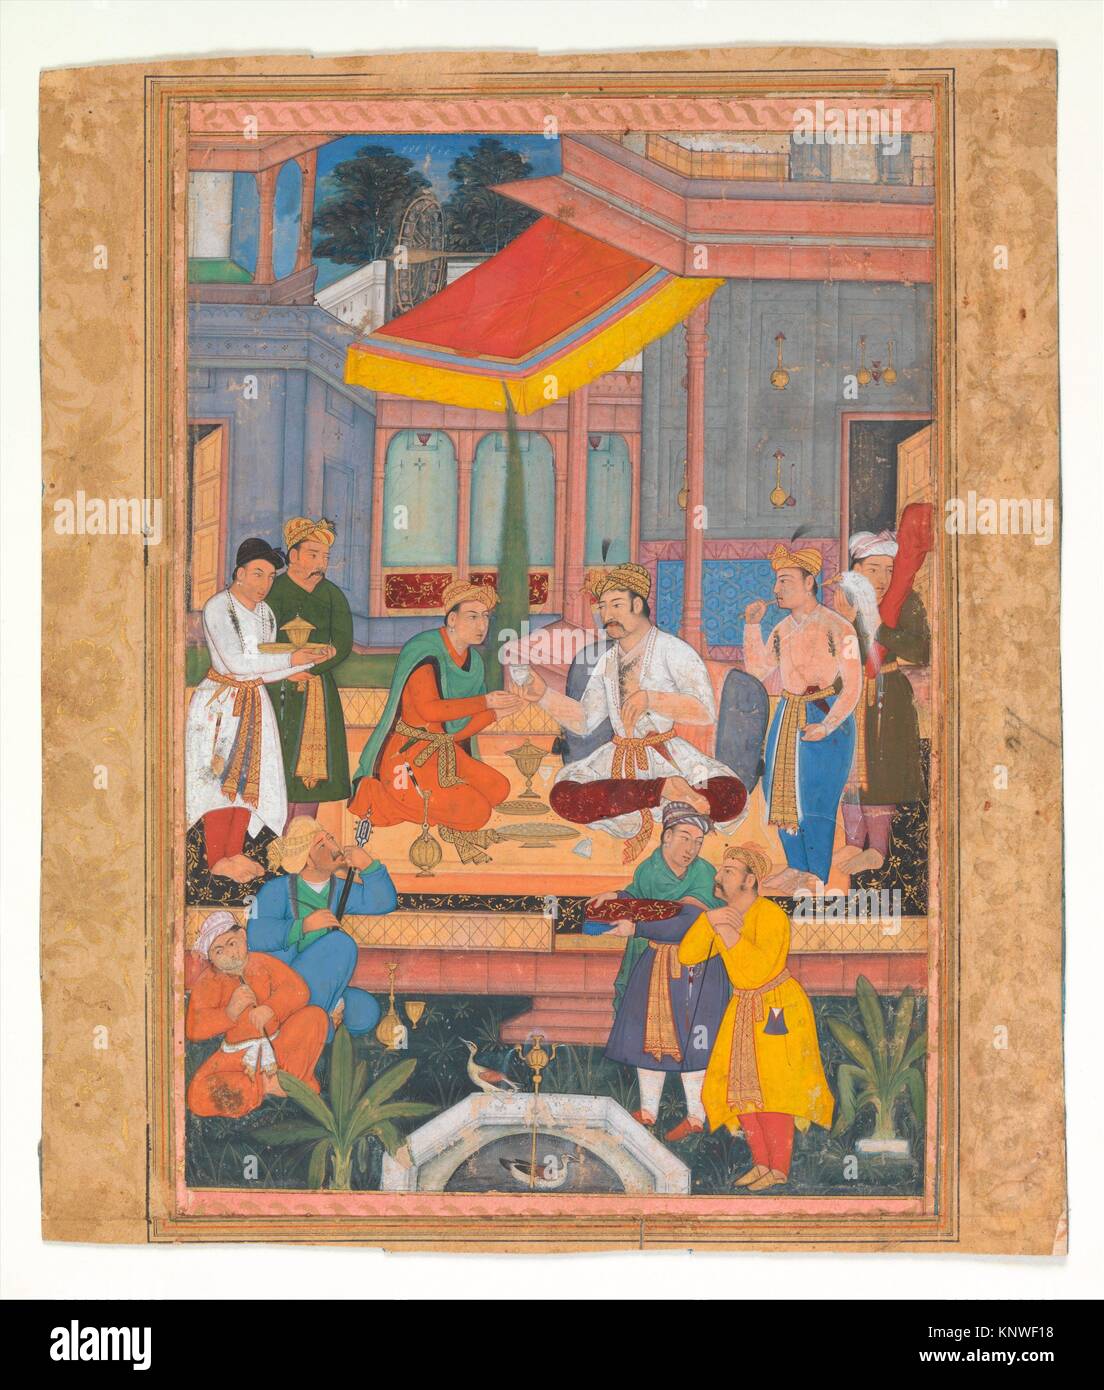 Interior of a Courtyard with Figures. Object Name: Folio from an illustrated manuscript; Date: early 17th century; Geography: Attributed to India; Stock Photo